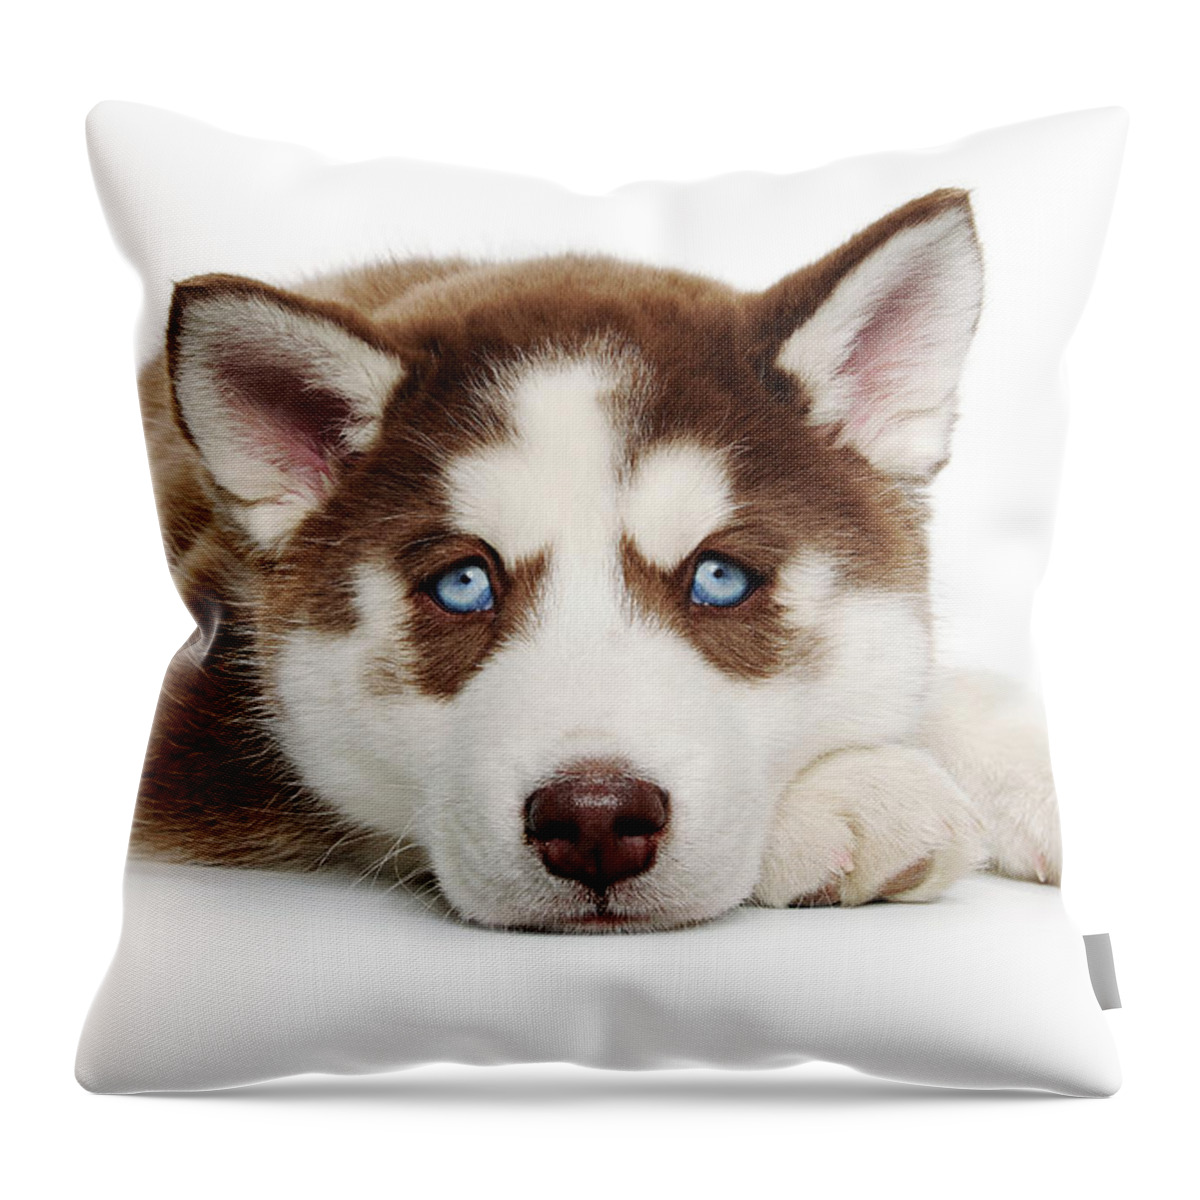 Pets Throw Pillow featuring the photograph Cute Holiday Christmas Tired Puppy by Chris Stein